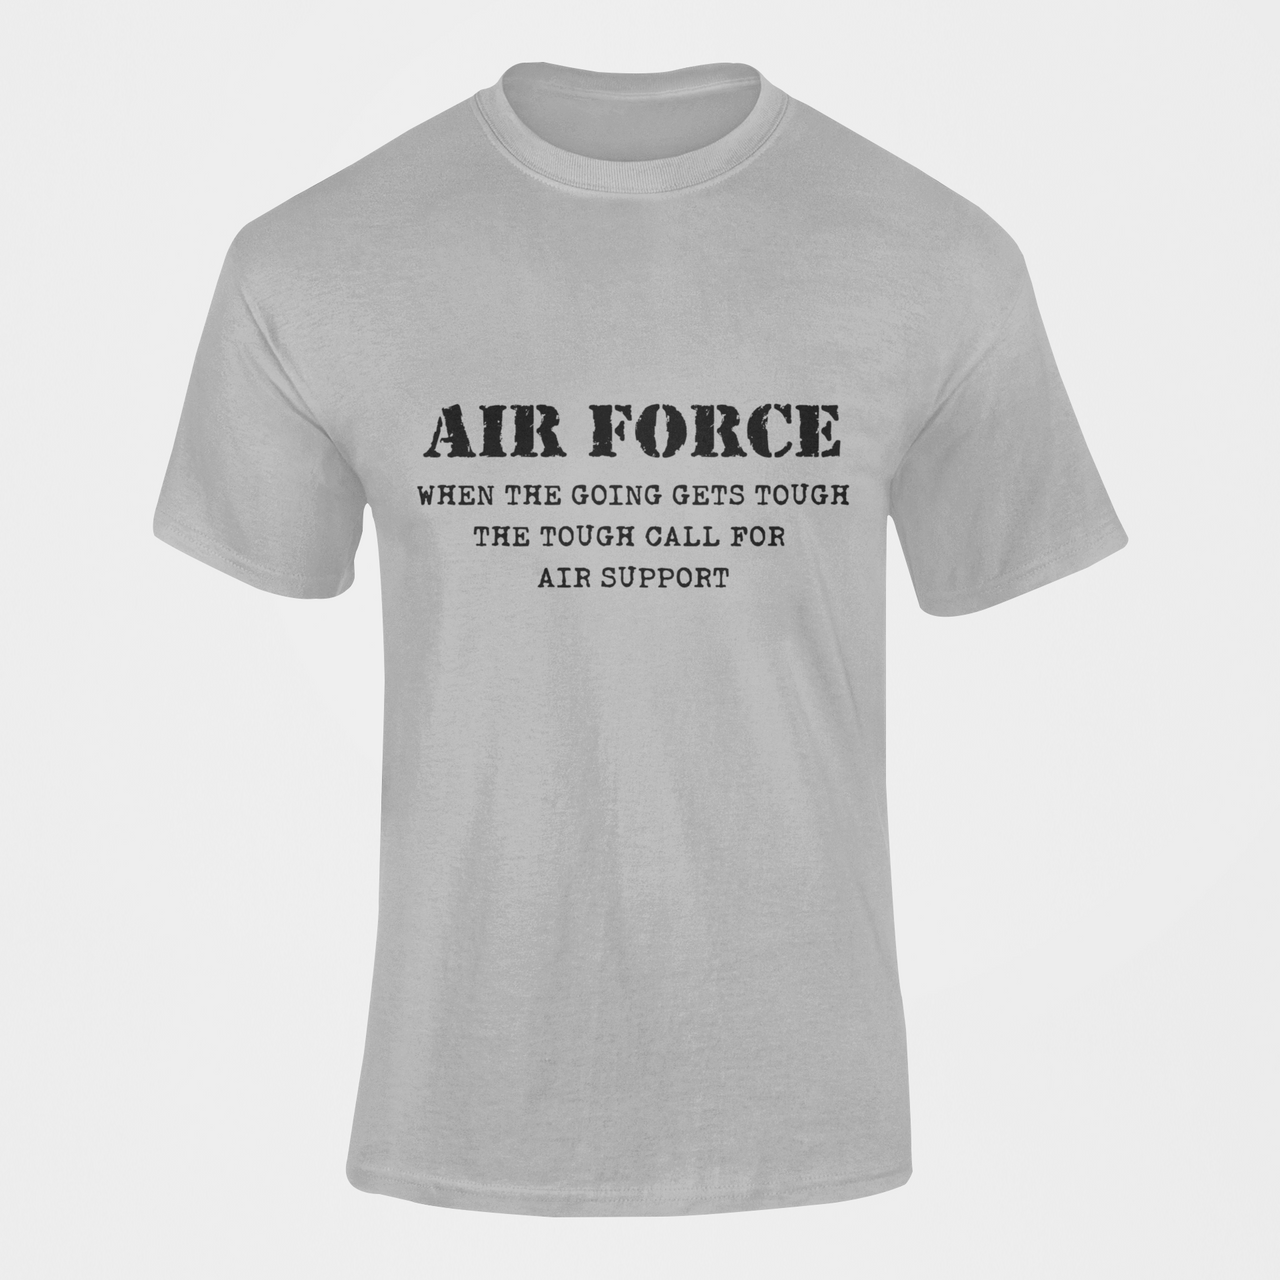 Military T-shirt - Air Force When The Going Gets Tough The Tough Call For Air Support (Men)